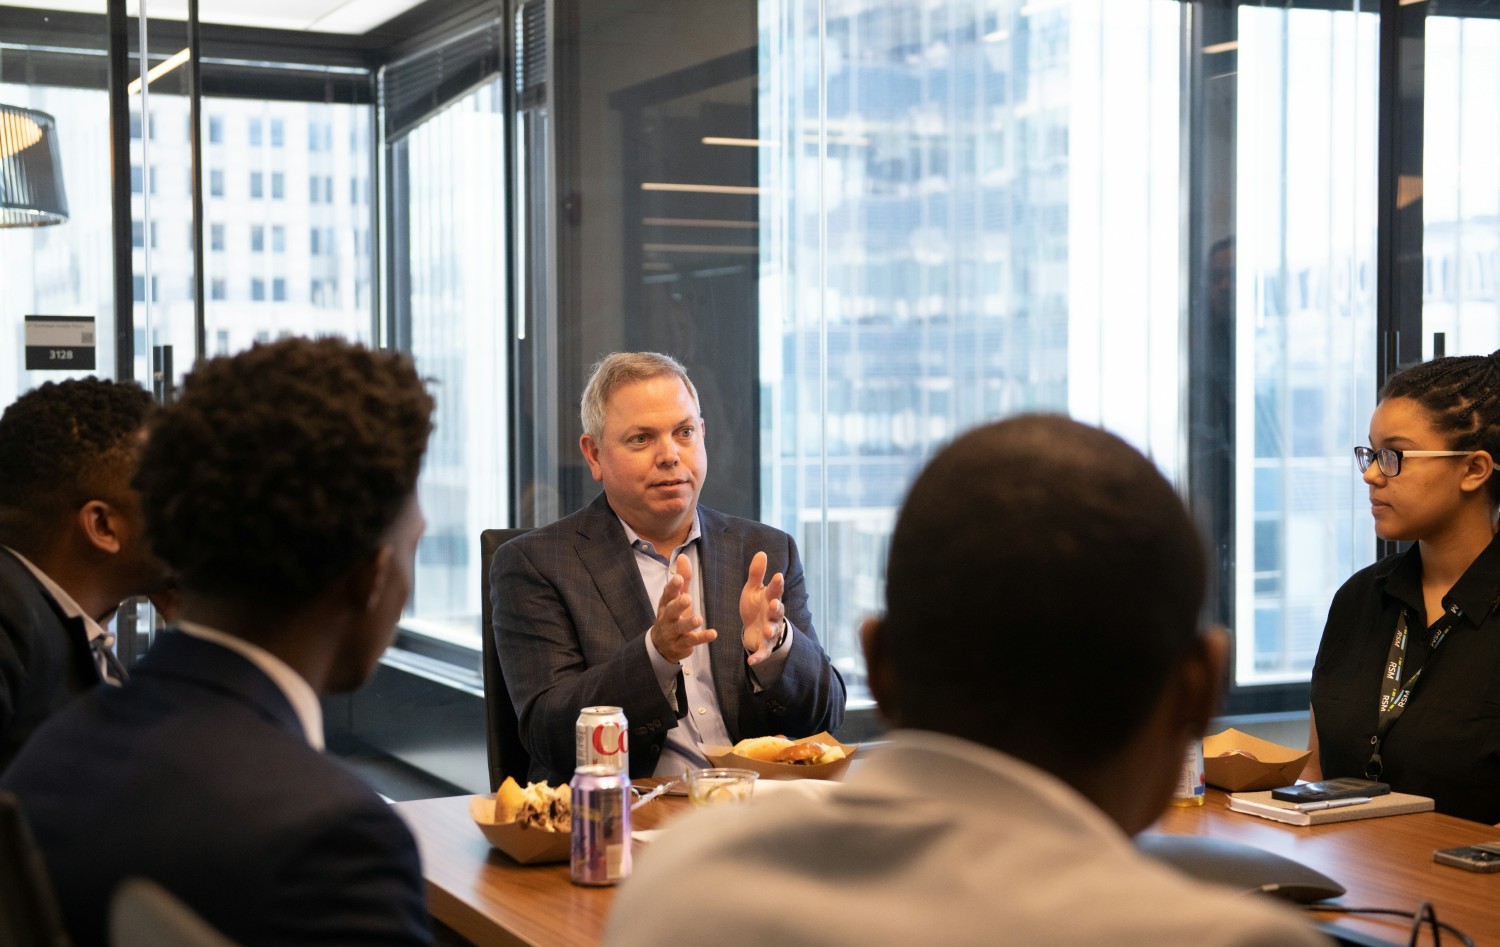 CEO Brian Becker welcomes RSM Excellence Academy Students by introducing them to the firm's inclusive culture.